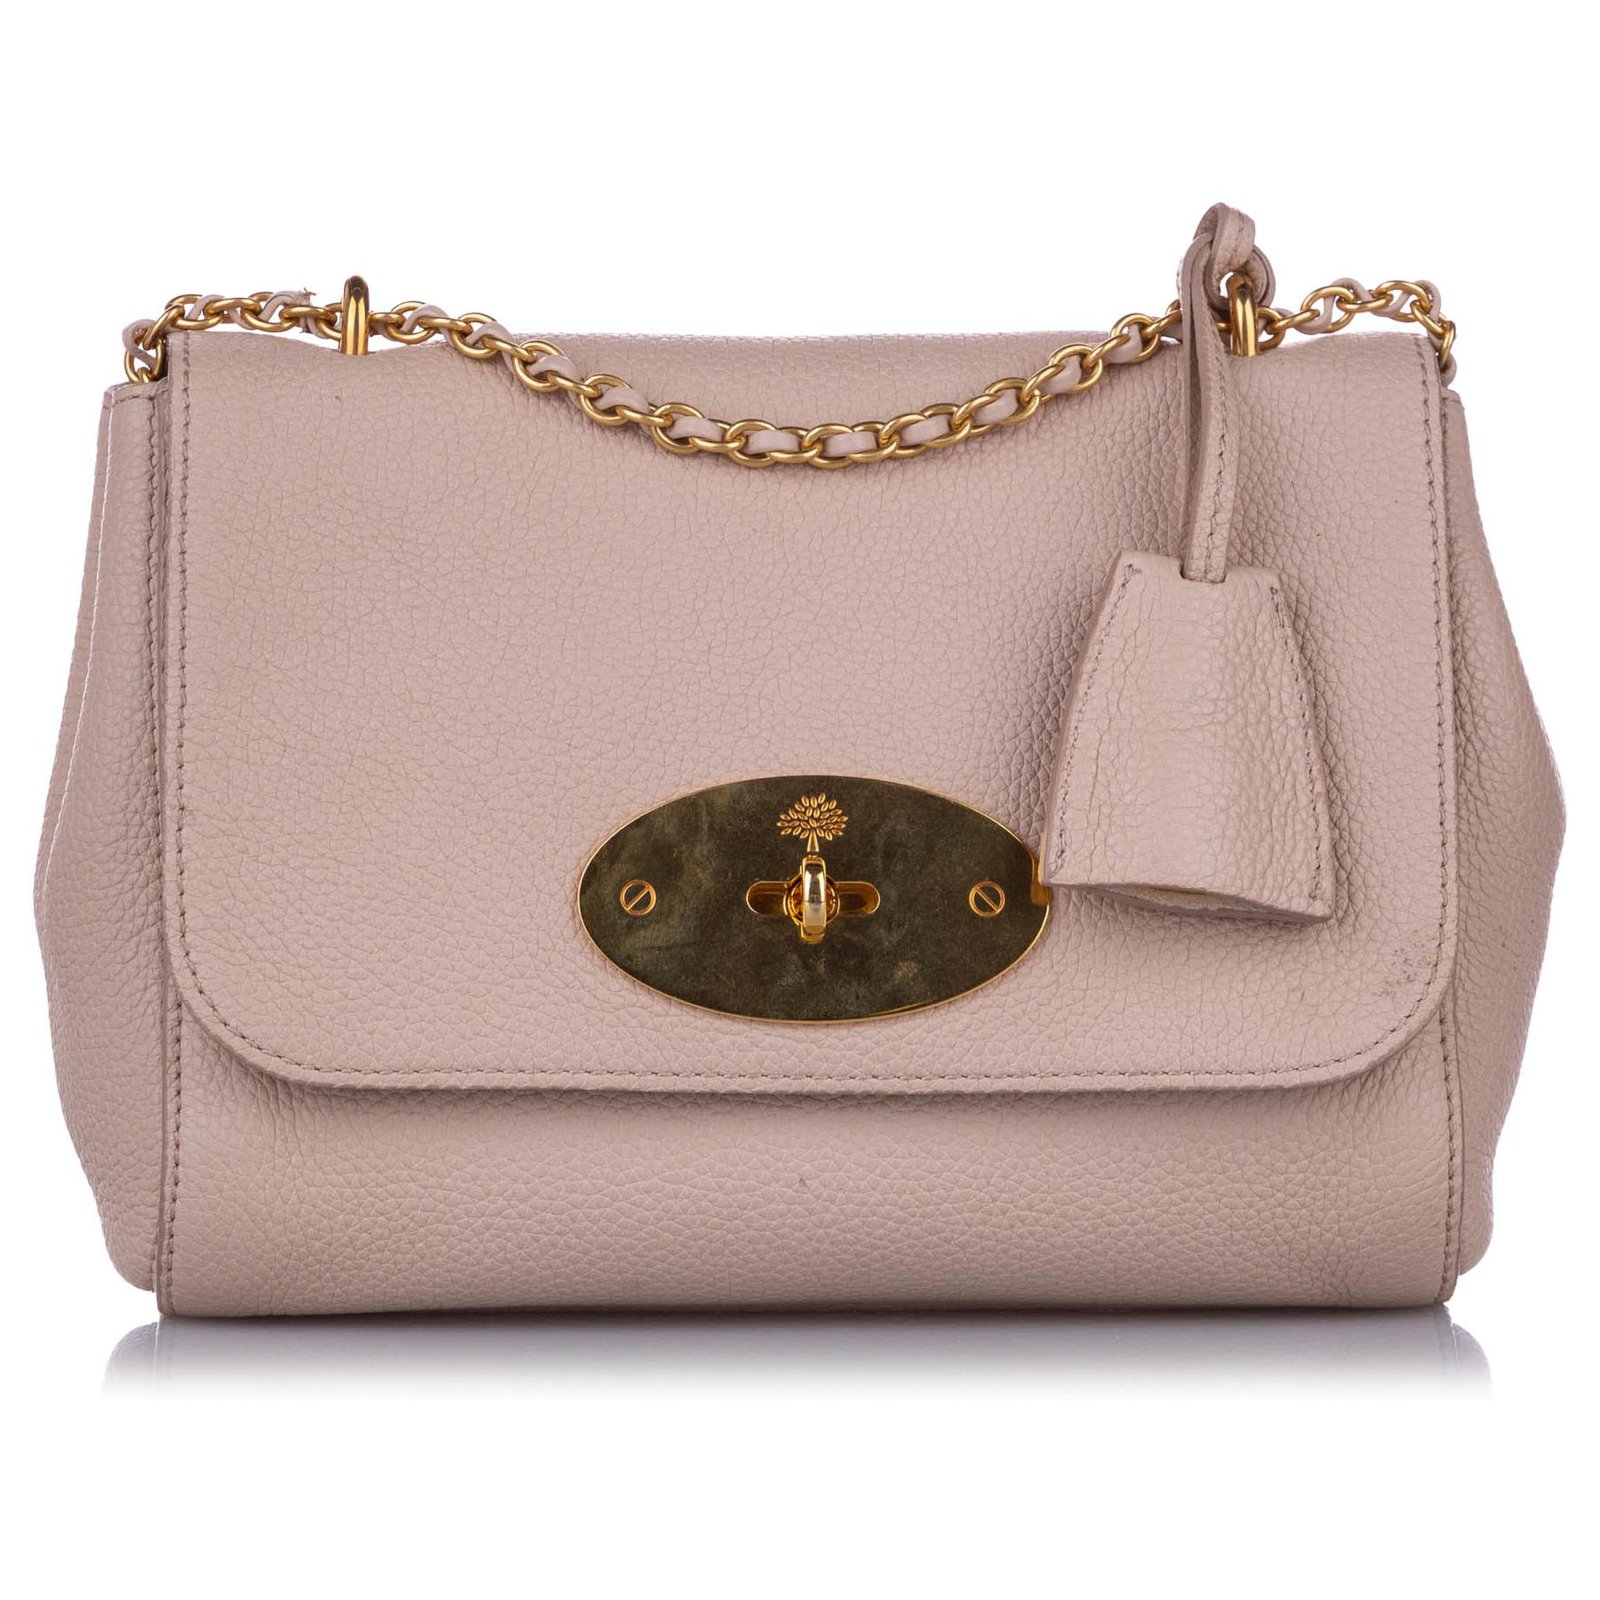 Mulberry Medium Darley Purse Wallet in Geranium Pink Small Classic Grain -  SOLD